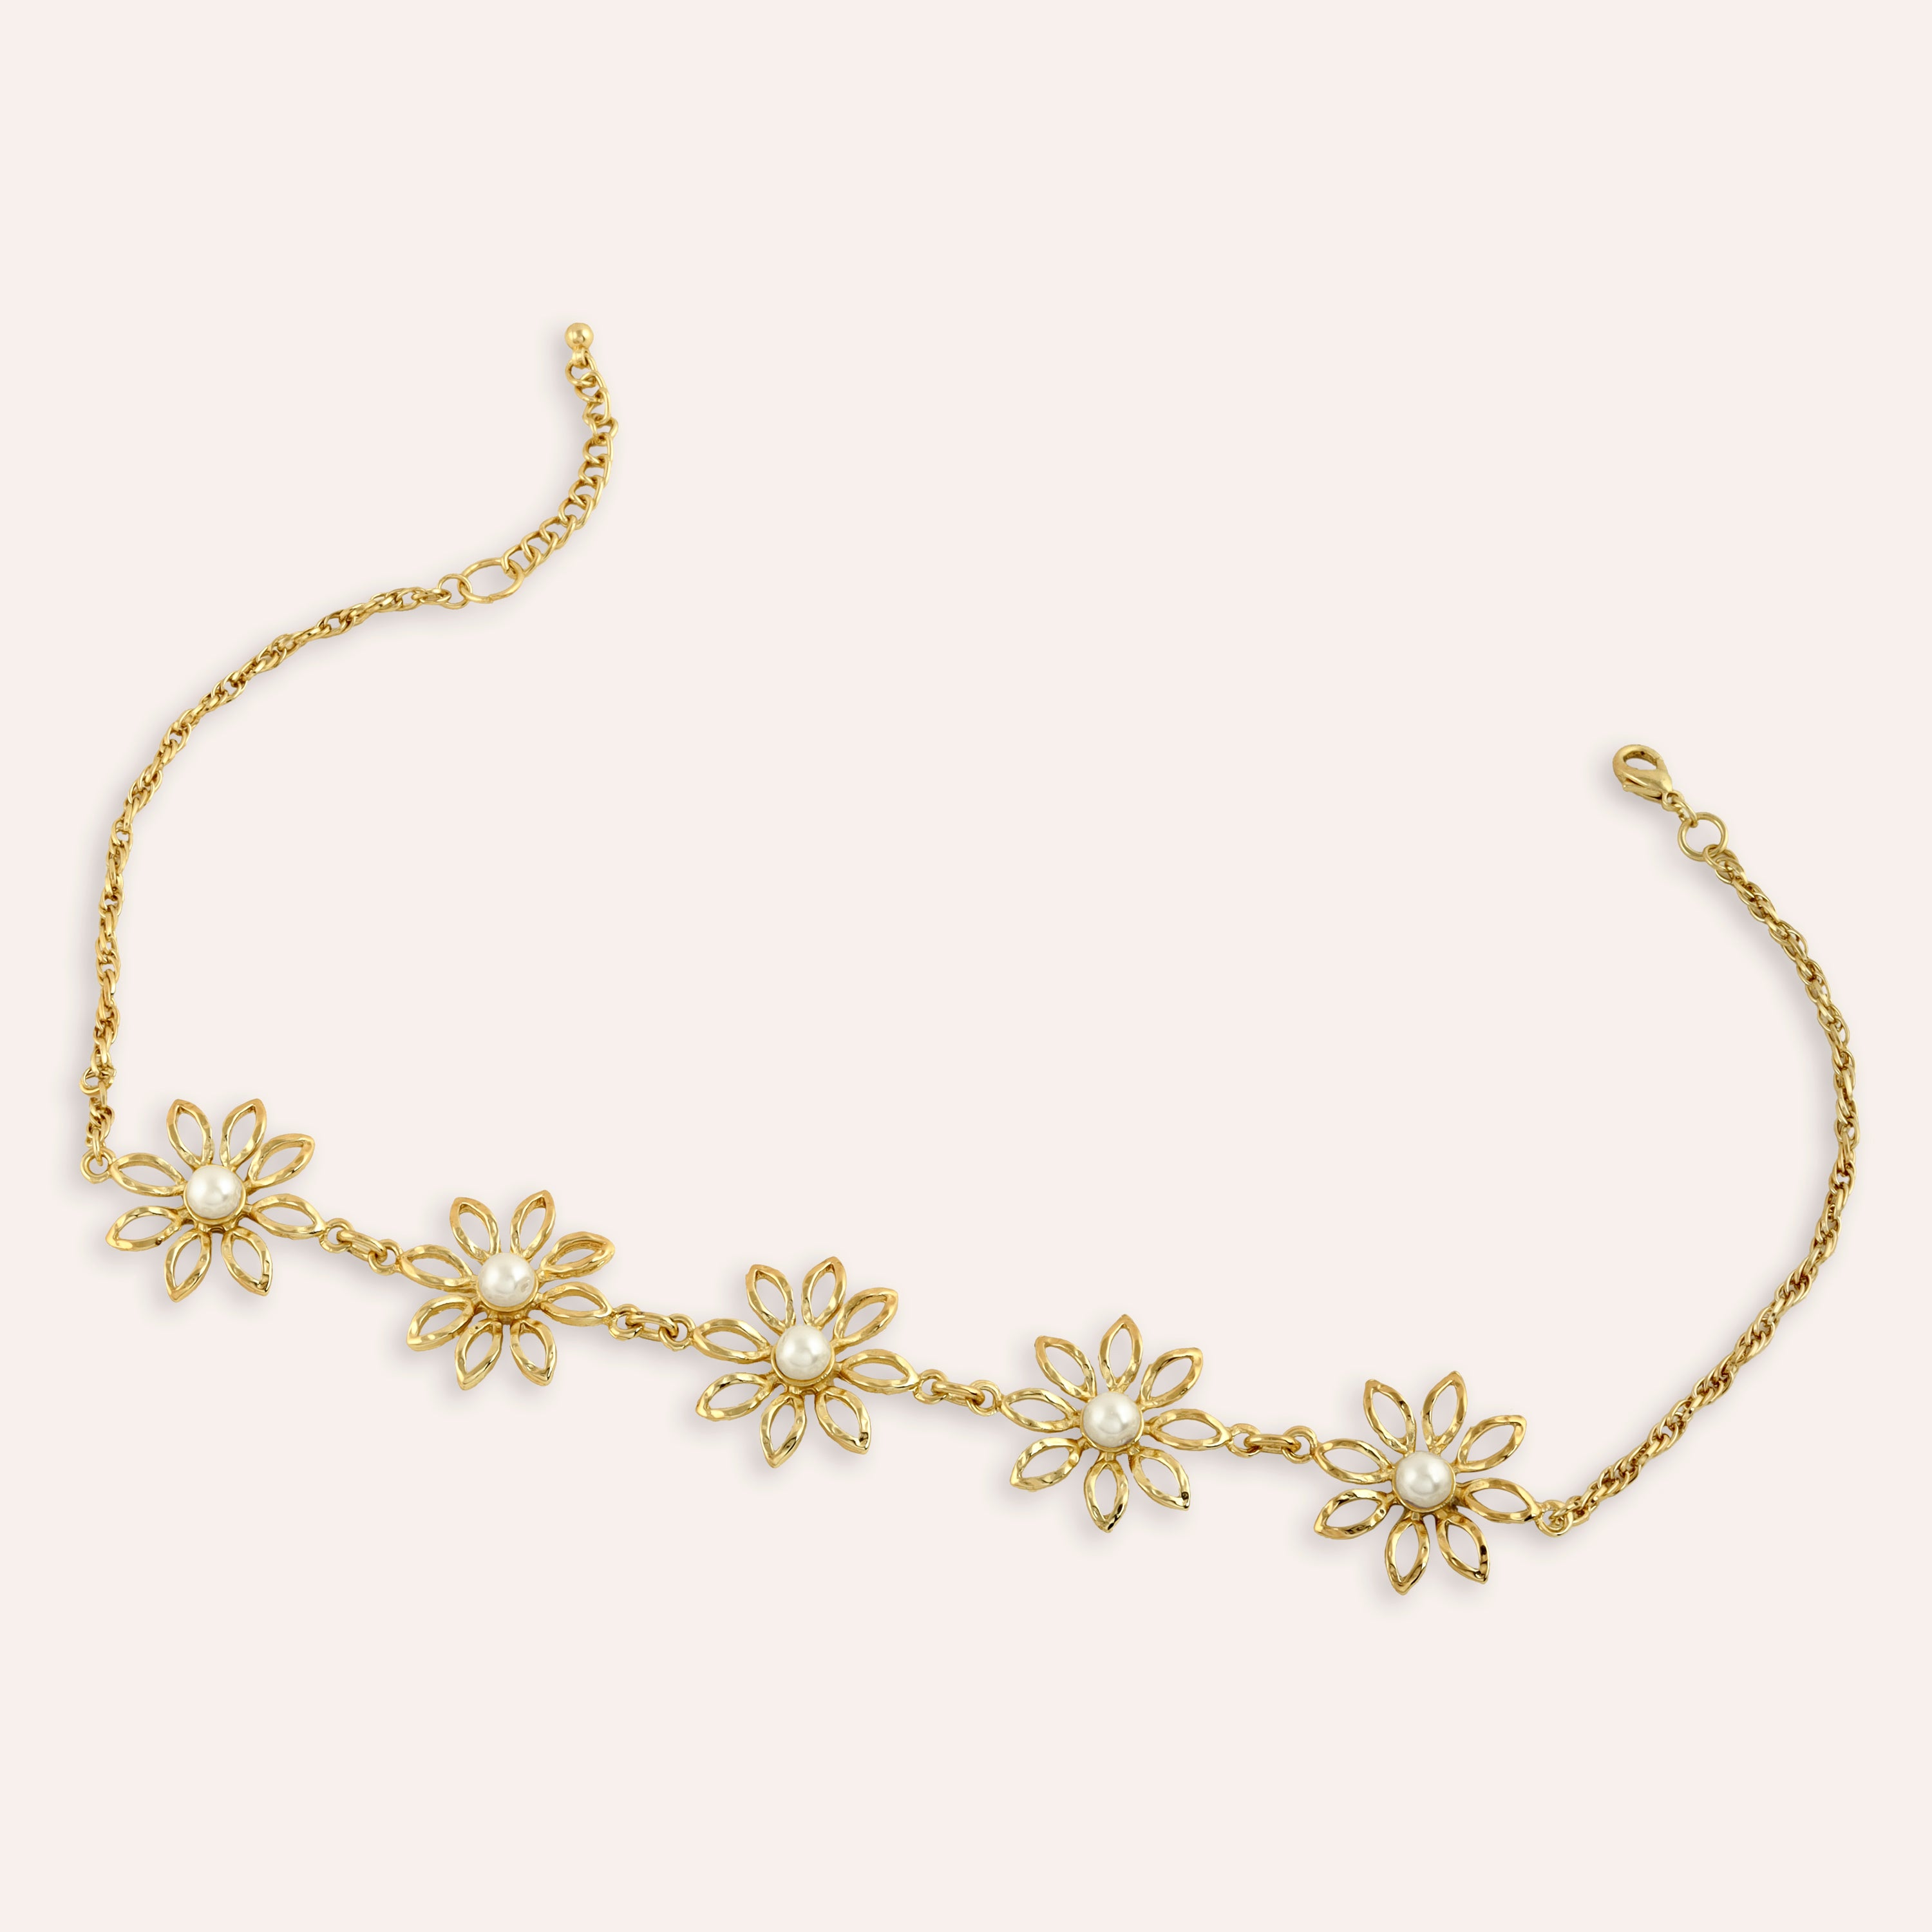 TFC Daisy Gold Plated Pearl Necklace-Enhance your elegance with our collection of gold-plated necklaces for women. Choose from stunning pendant necklaces, chic choker necklaces, and trendy layered necklaces. Our sleek and dainty designs are both affordable and anti-tarnish, ensuring lasting beauty. Enjoy the cheapest fashion jewellery, lightweight and stylish- only at The Fun Company